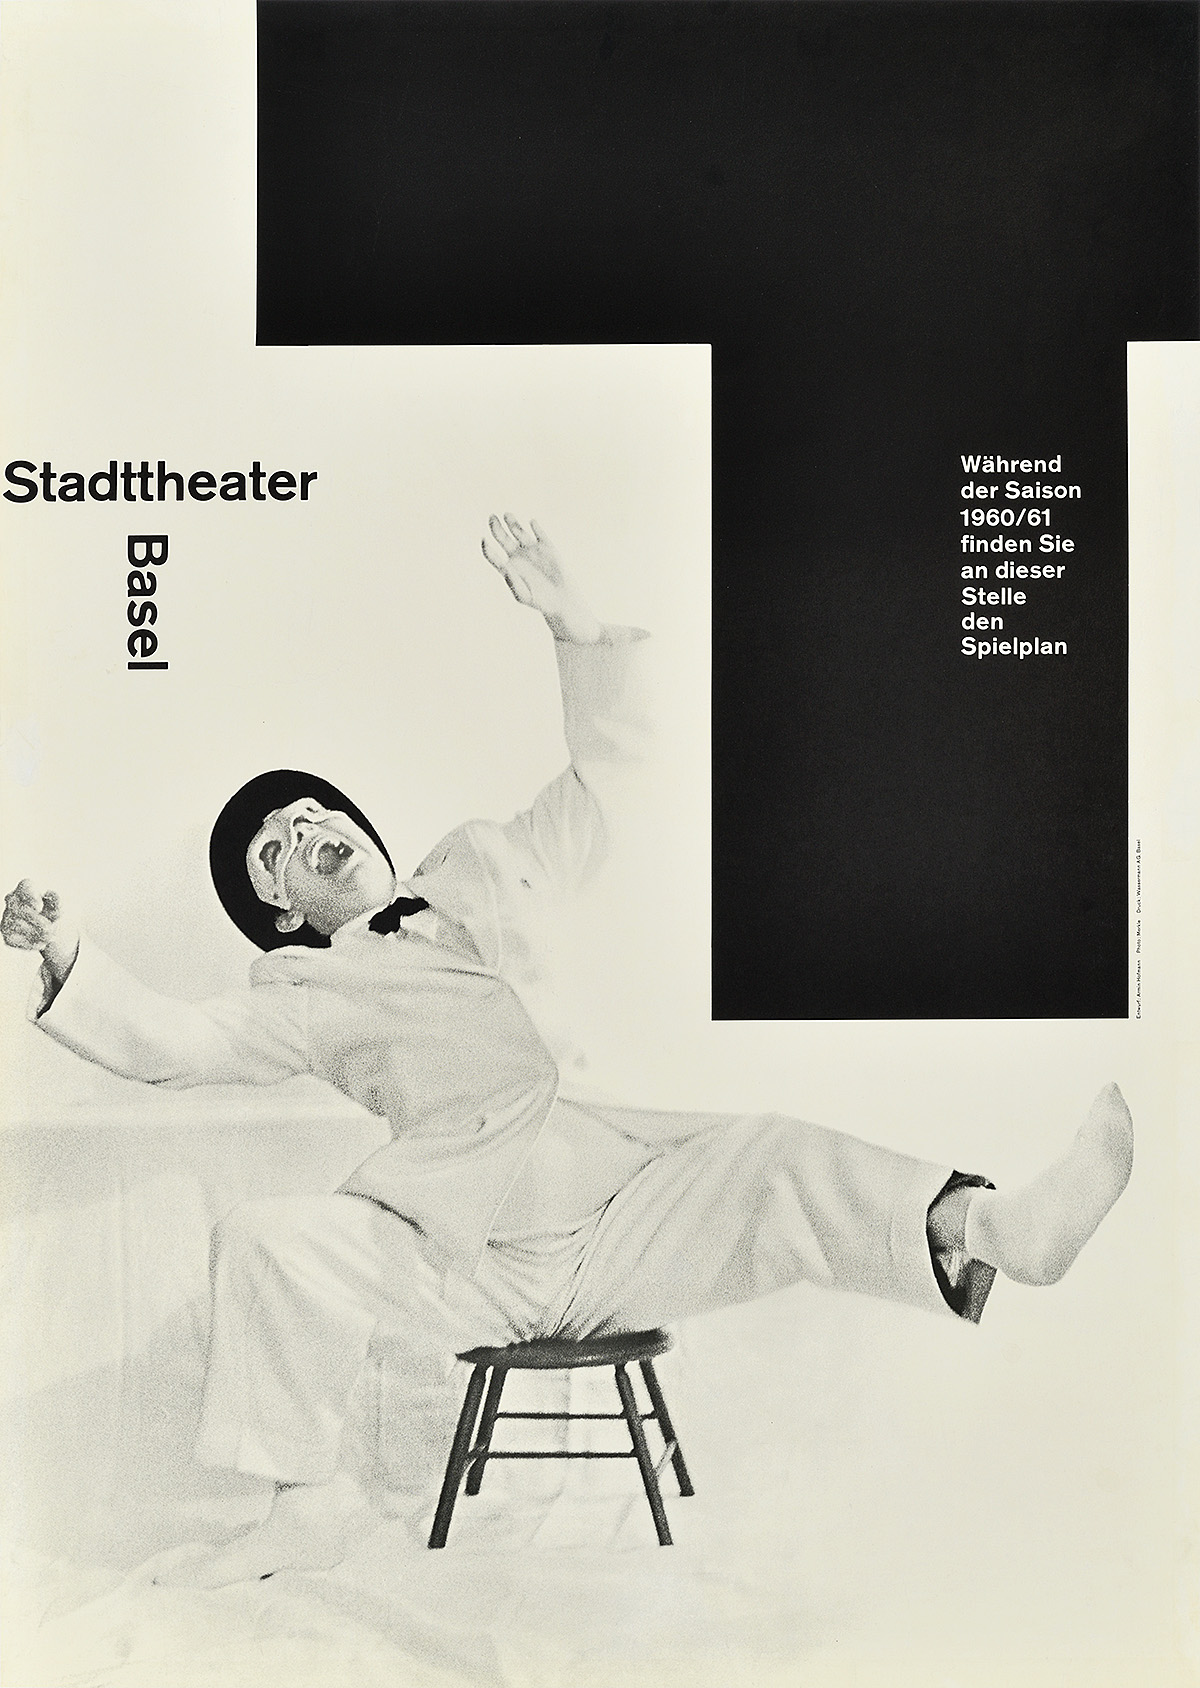 photographic poster of a man in a white costume laughing exaggeratedly on a small wooden chair